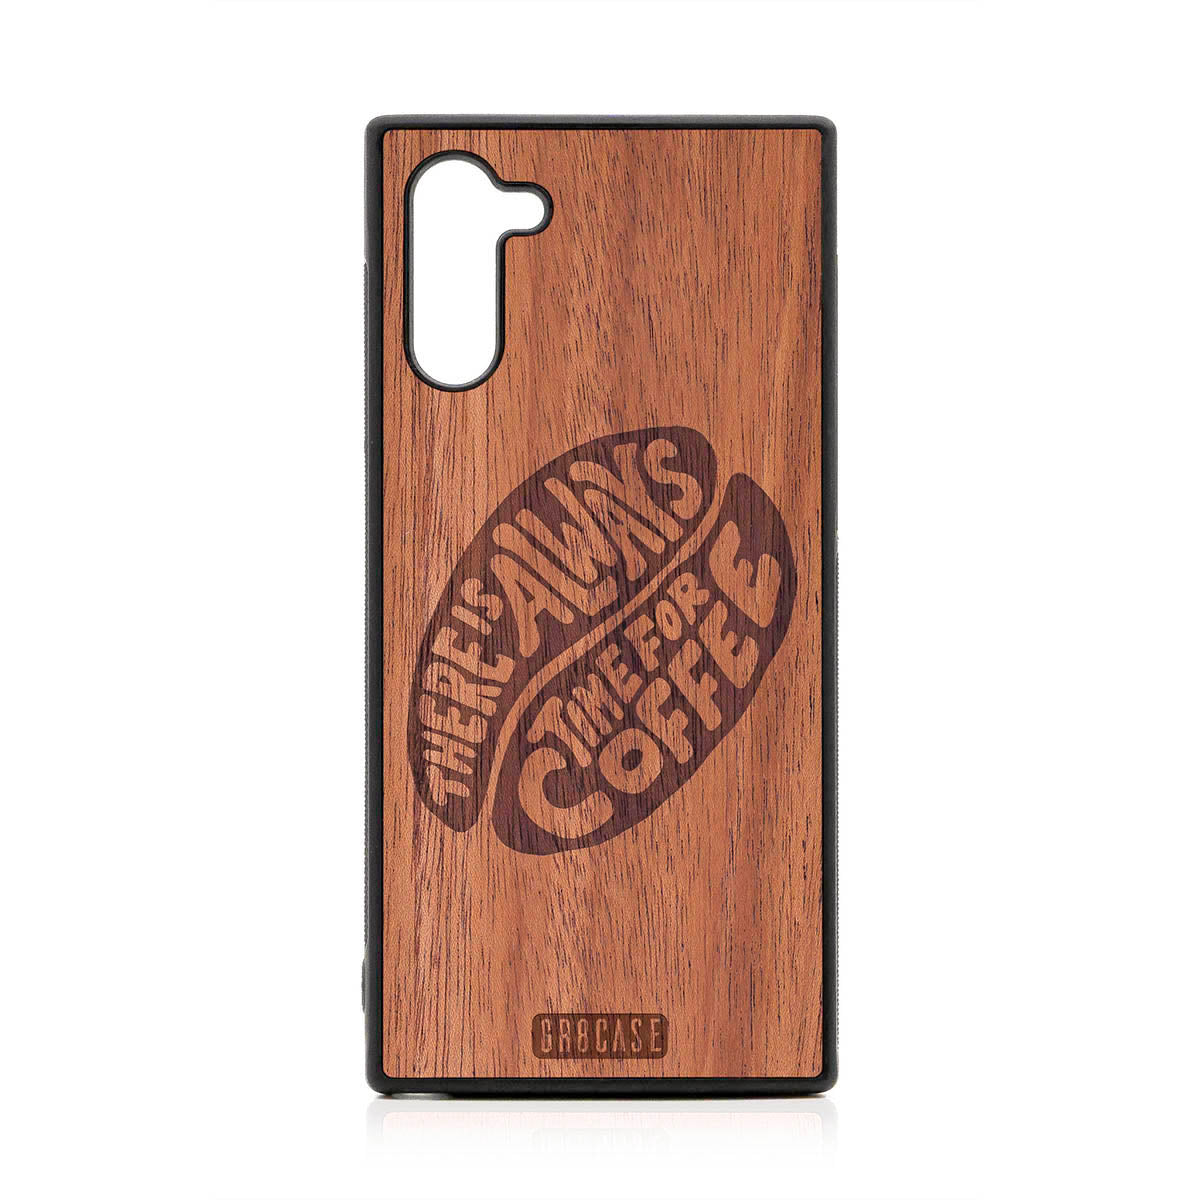 There Is Always Time For Coffee Design Wood Case For Samsung Galaxy Note 10